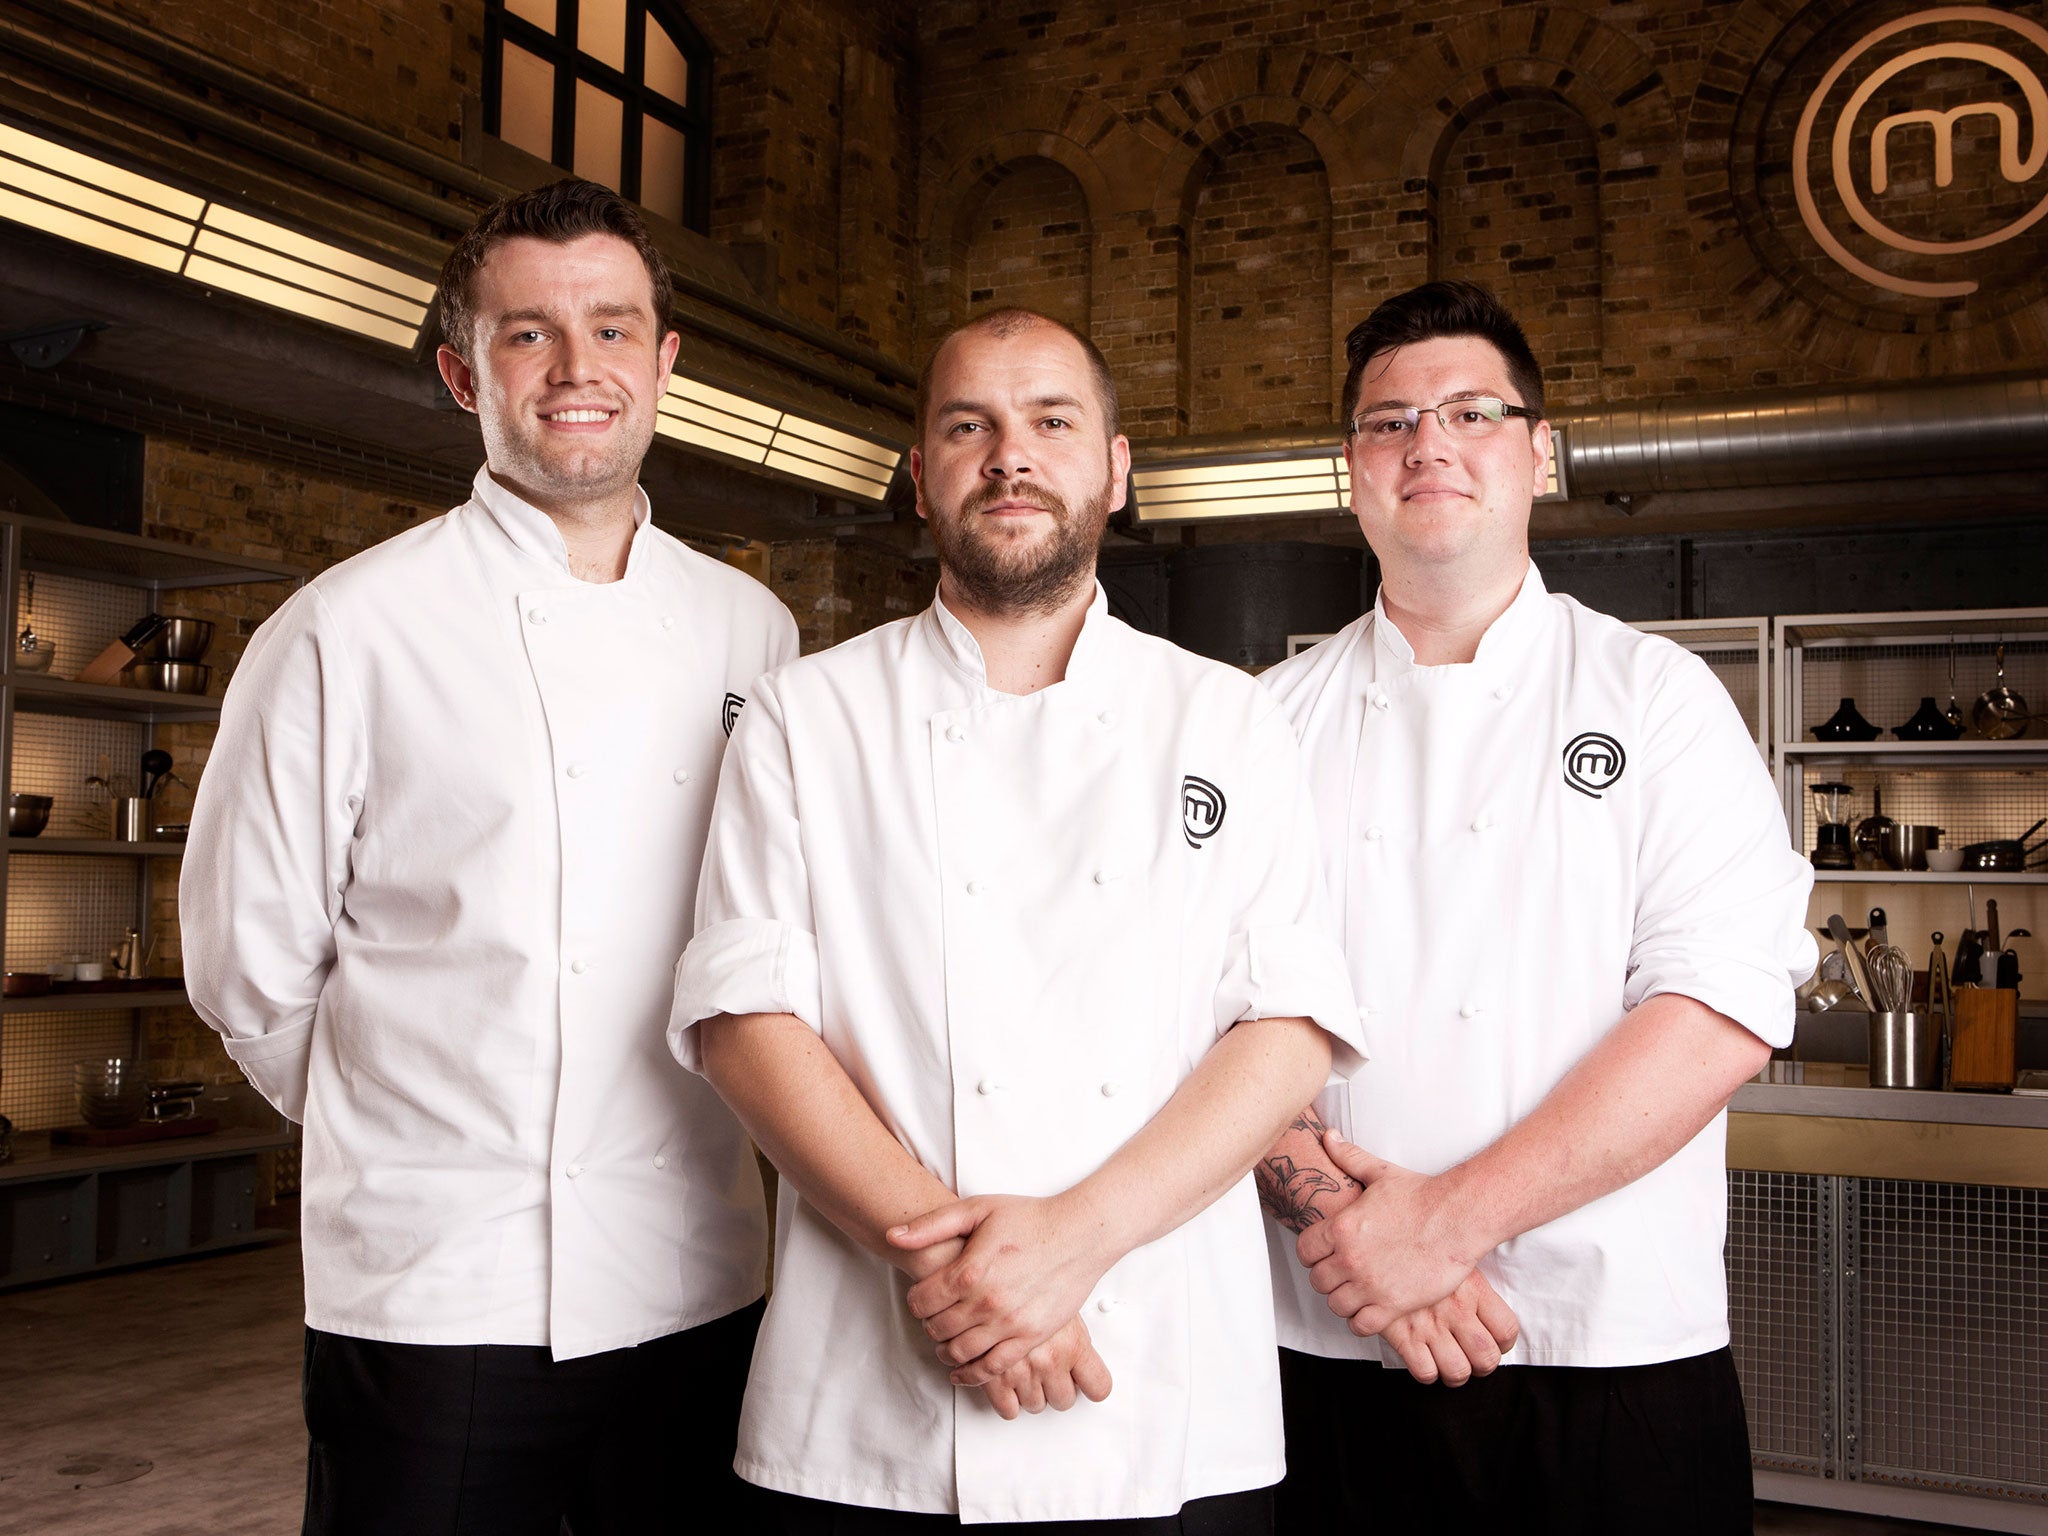 Sven, Brian and Jamie will compete in the final of Masterchef: The Professionals